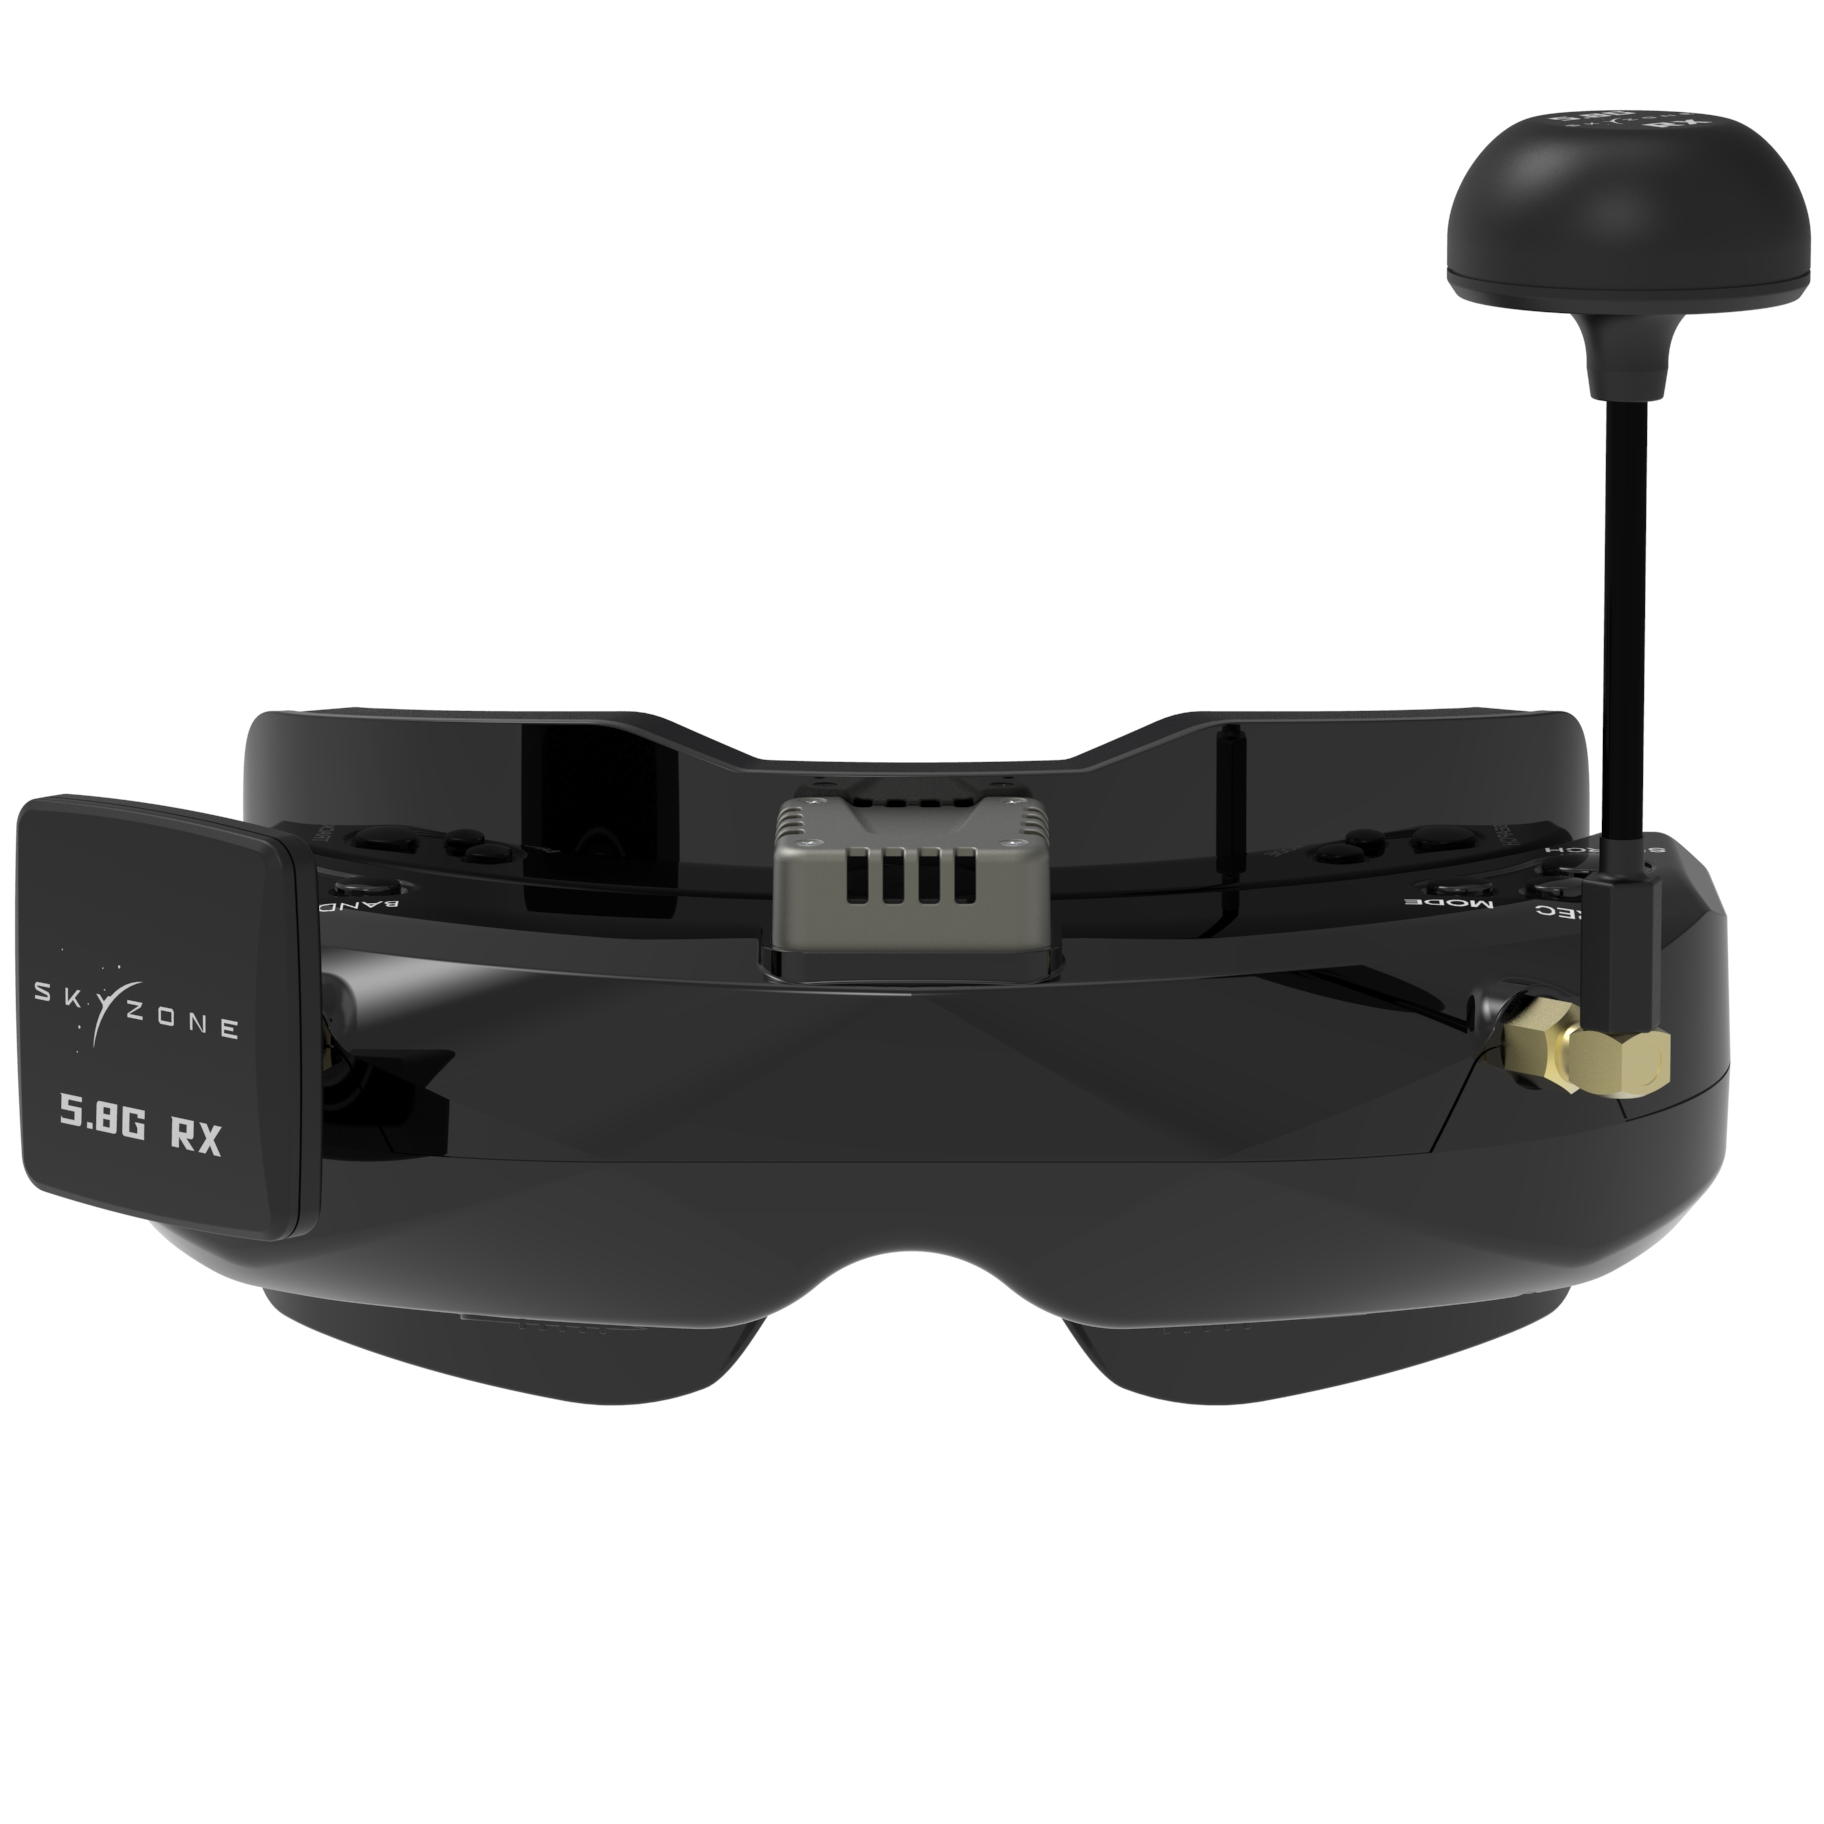 SKYZONE SKY02O FPV Goggles OLED 5.8Ghz SteadyView Diversity RX Built in HeadTracker DVR HDMI AVIN/OUT for RC Racing Drone 1